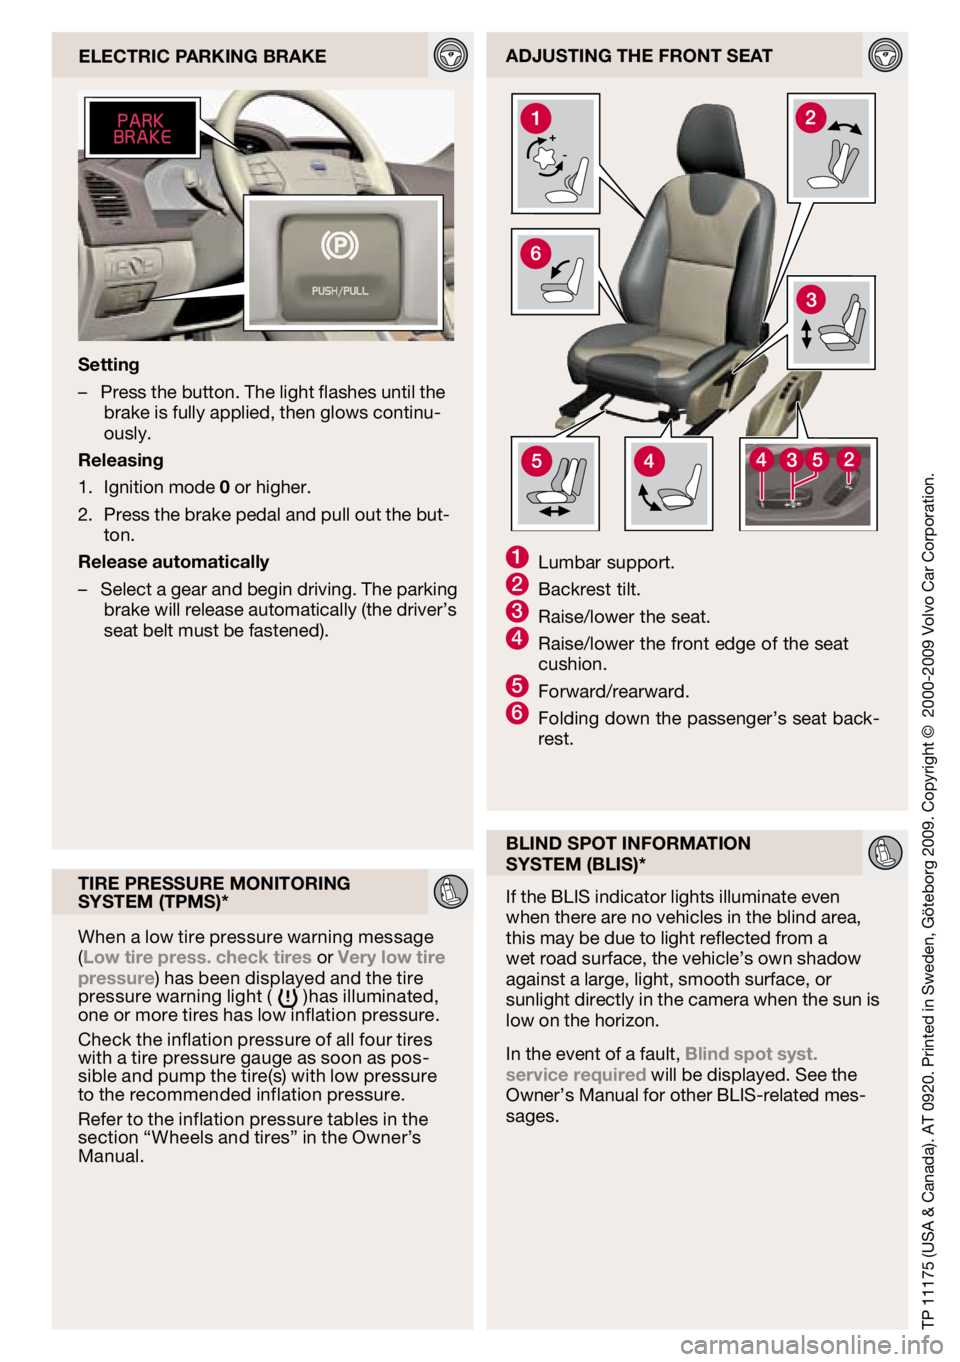 VOLVO XC60 2010  Quick Guide 
TP 11175 (USA & Canada). AT 0920. Printed in Sweden, Göteborg 2009. Copyright ©  2000-2009 Volvo Car Corporation.
adjUsting the front seat
eLectric P arking Brake
1 Lumbar support.2 Backrest tilt.3